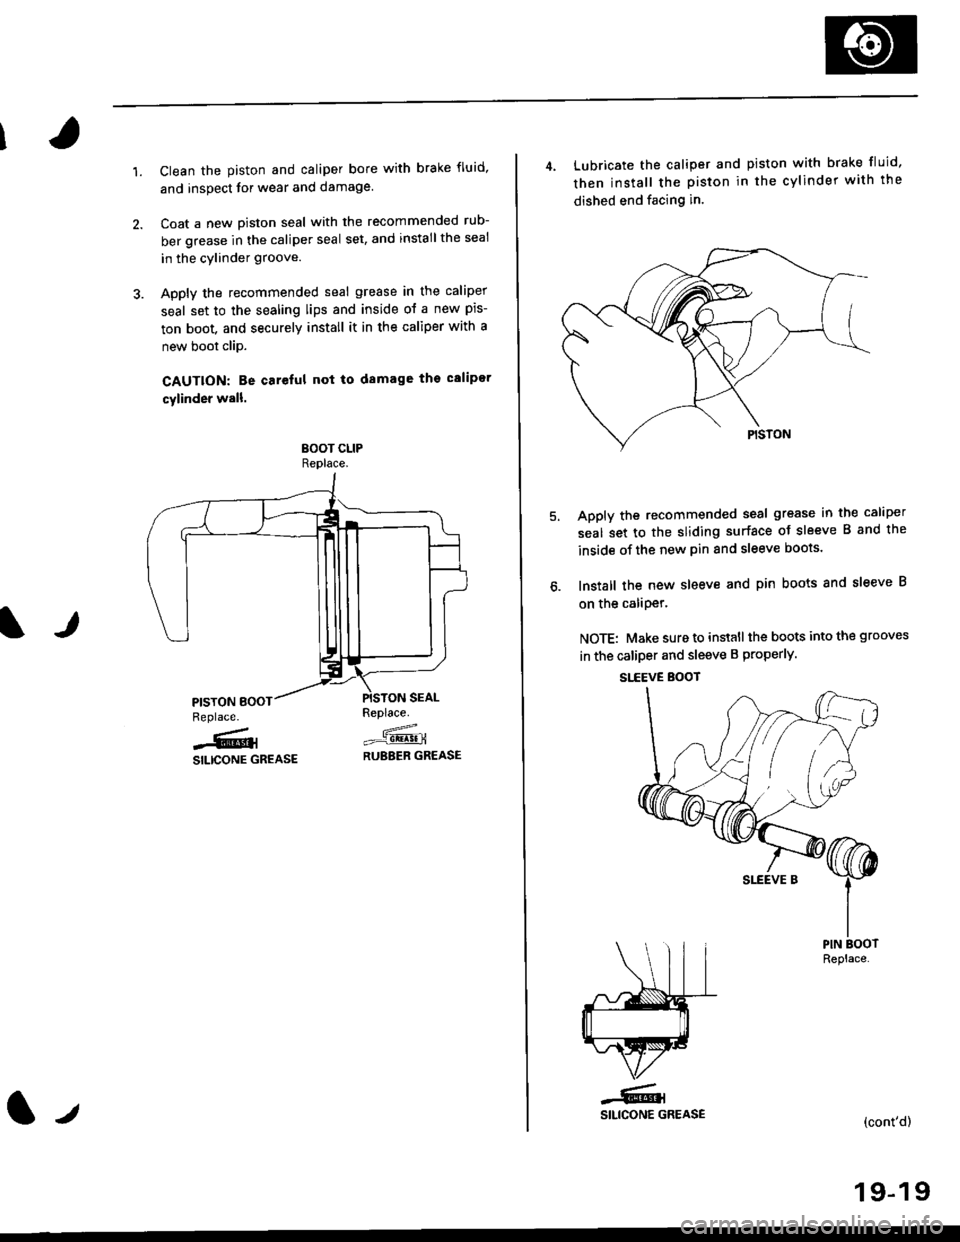 HONDA CIVIC 1997 6.G Owners Guide 1.Clean the piston and caliper bore with brake fluid,
and inspect for wear and damage.
Coat a new Diston seal with the recommended rub-
ber grease in the caliper seal set, and installthe seal
in the c